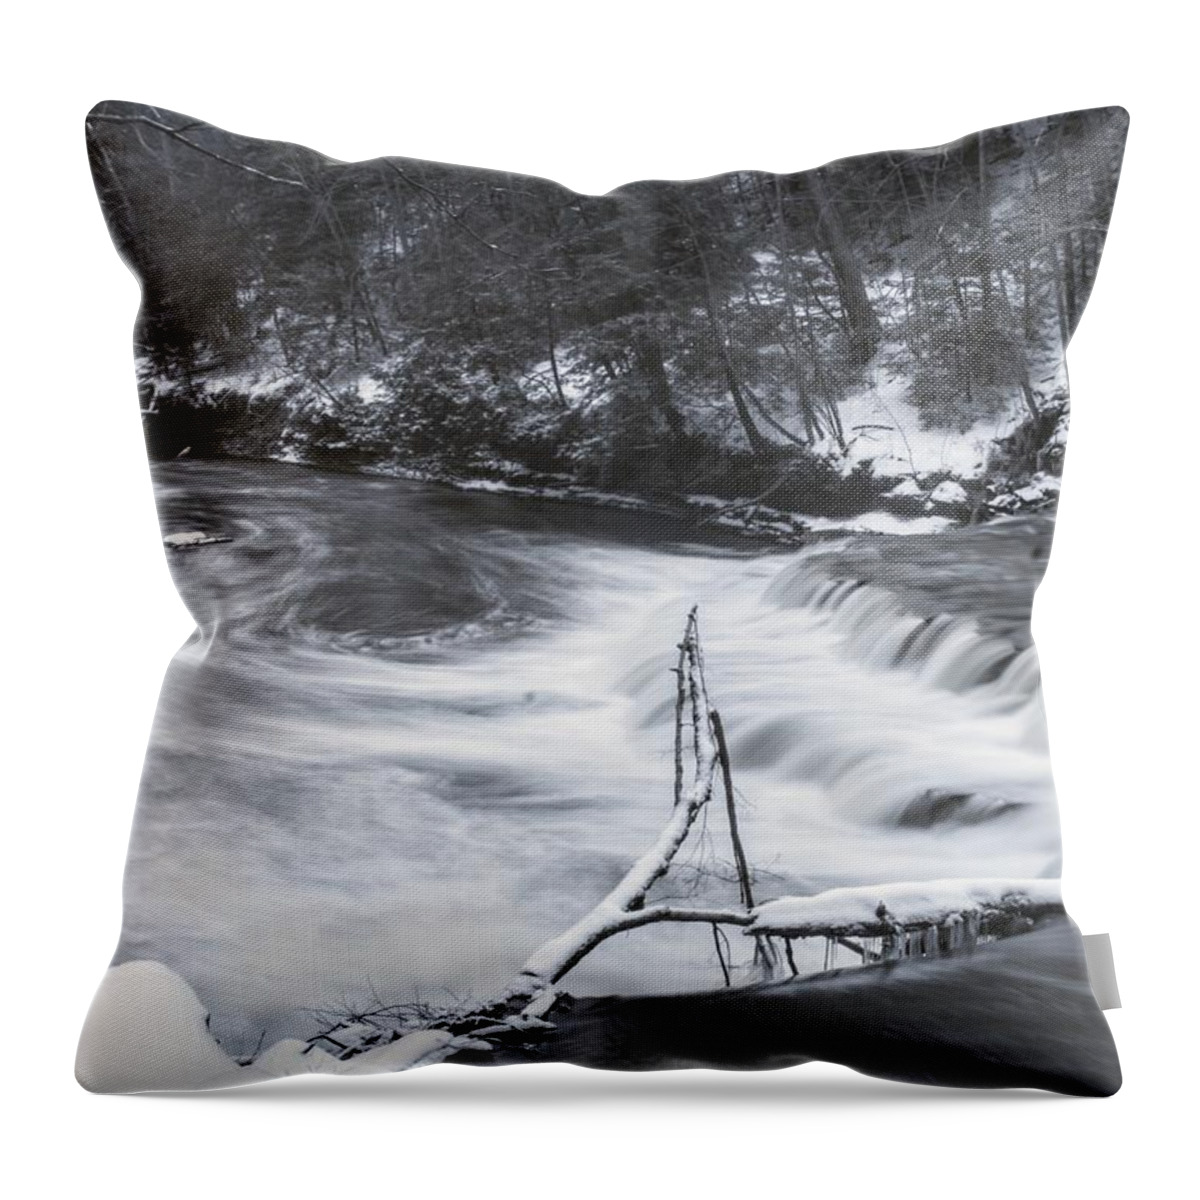  Throw Pillow featuring the photograph Henry Church Rock Falls by Brad Nellis